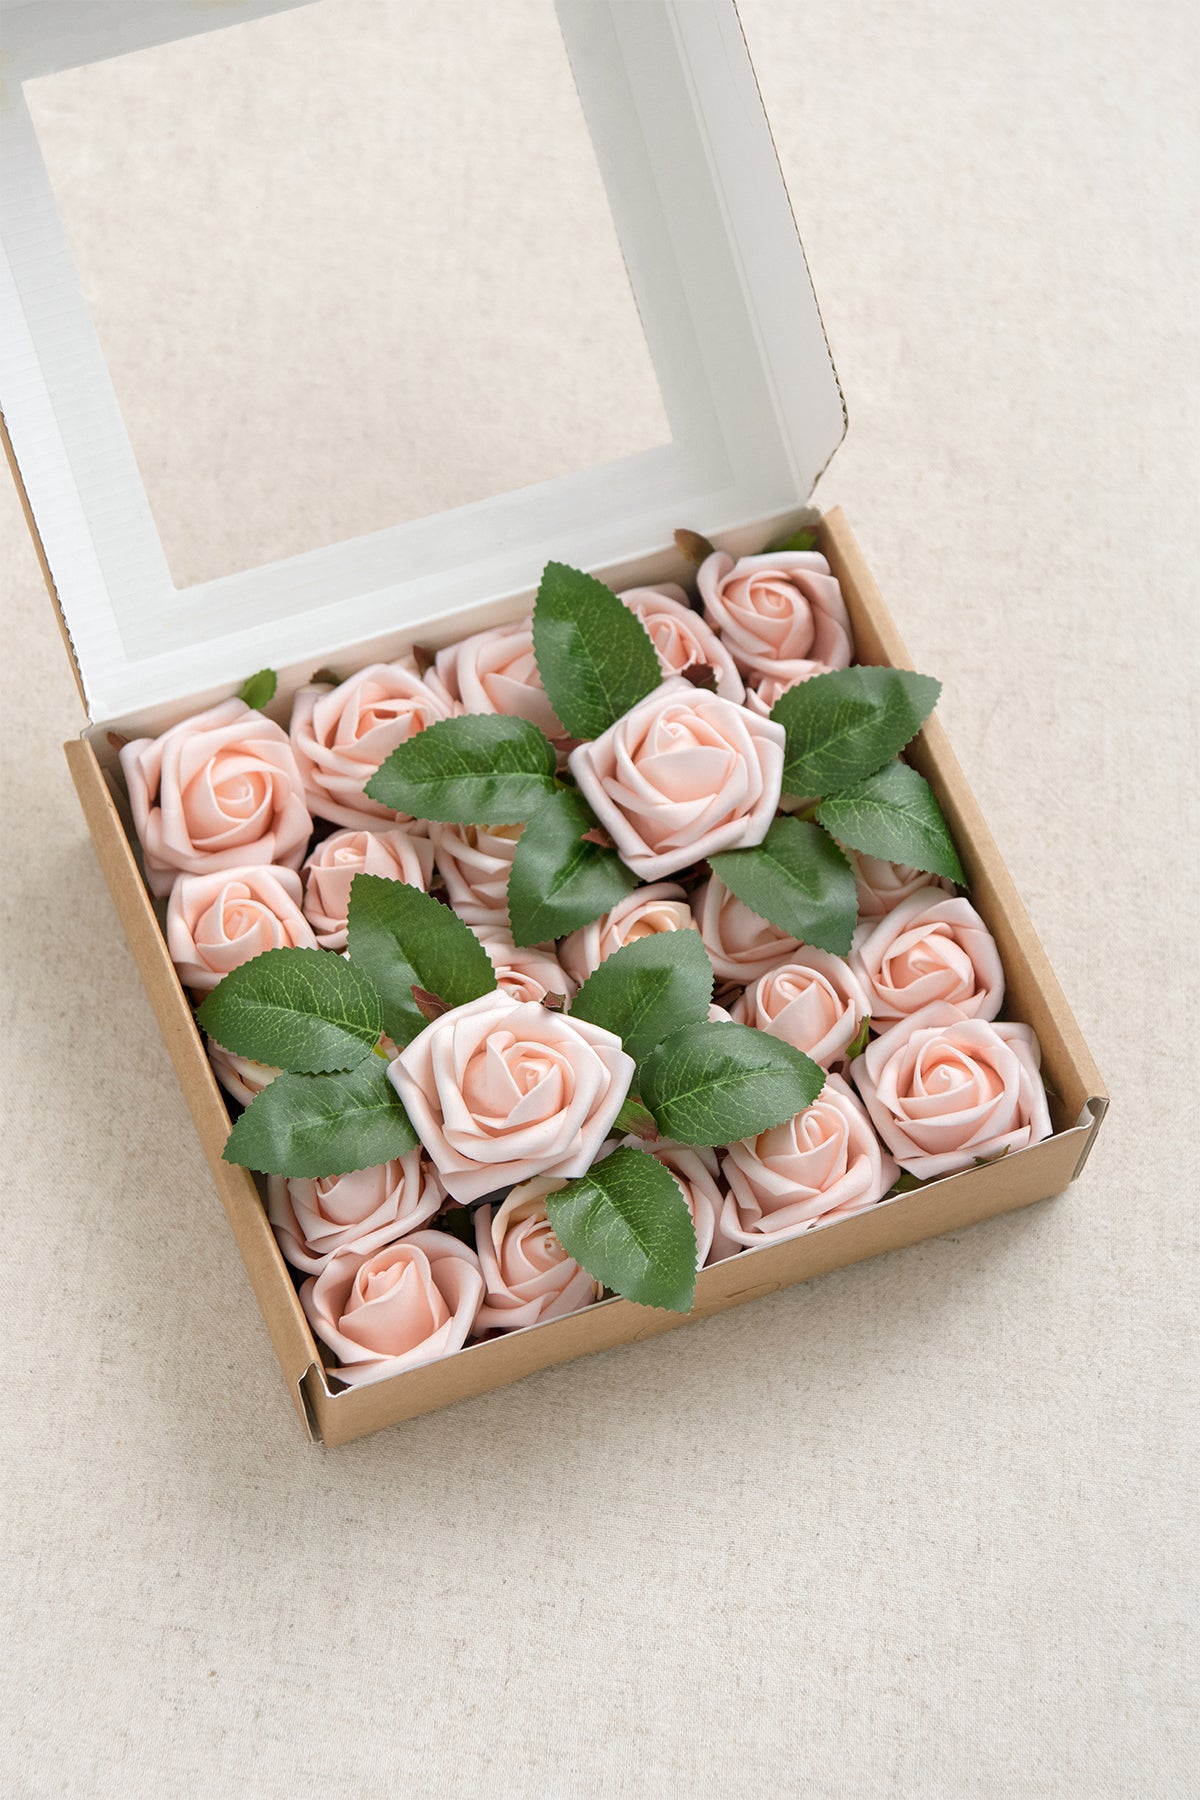 12 Foam Rose Bouquet with Pearls & Diamond Pins (1 Pc) – LACrafts